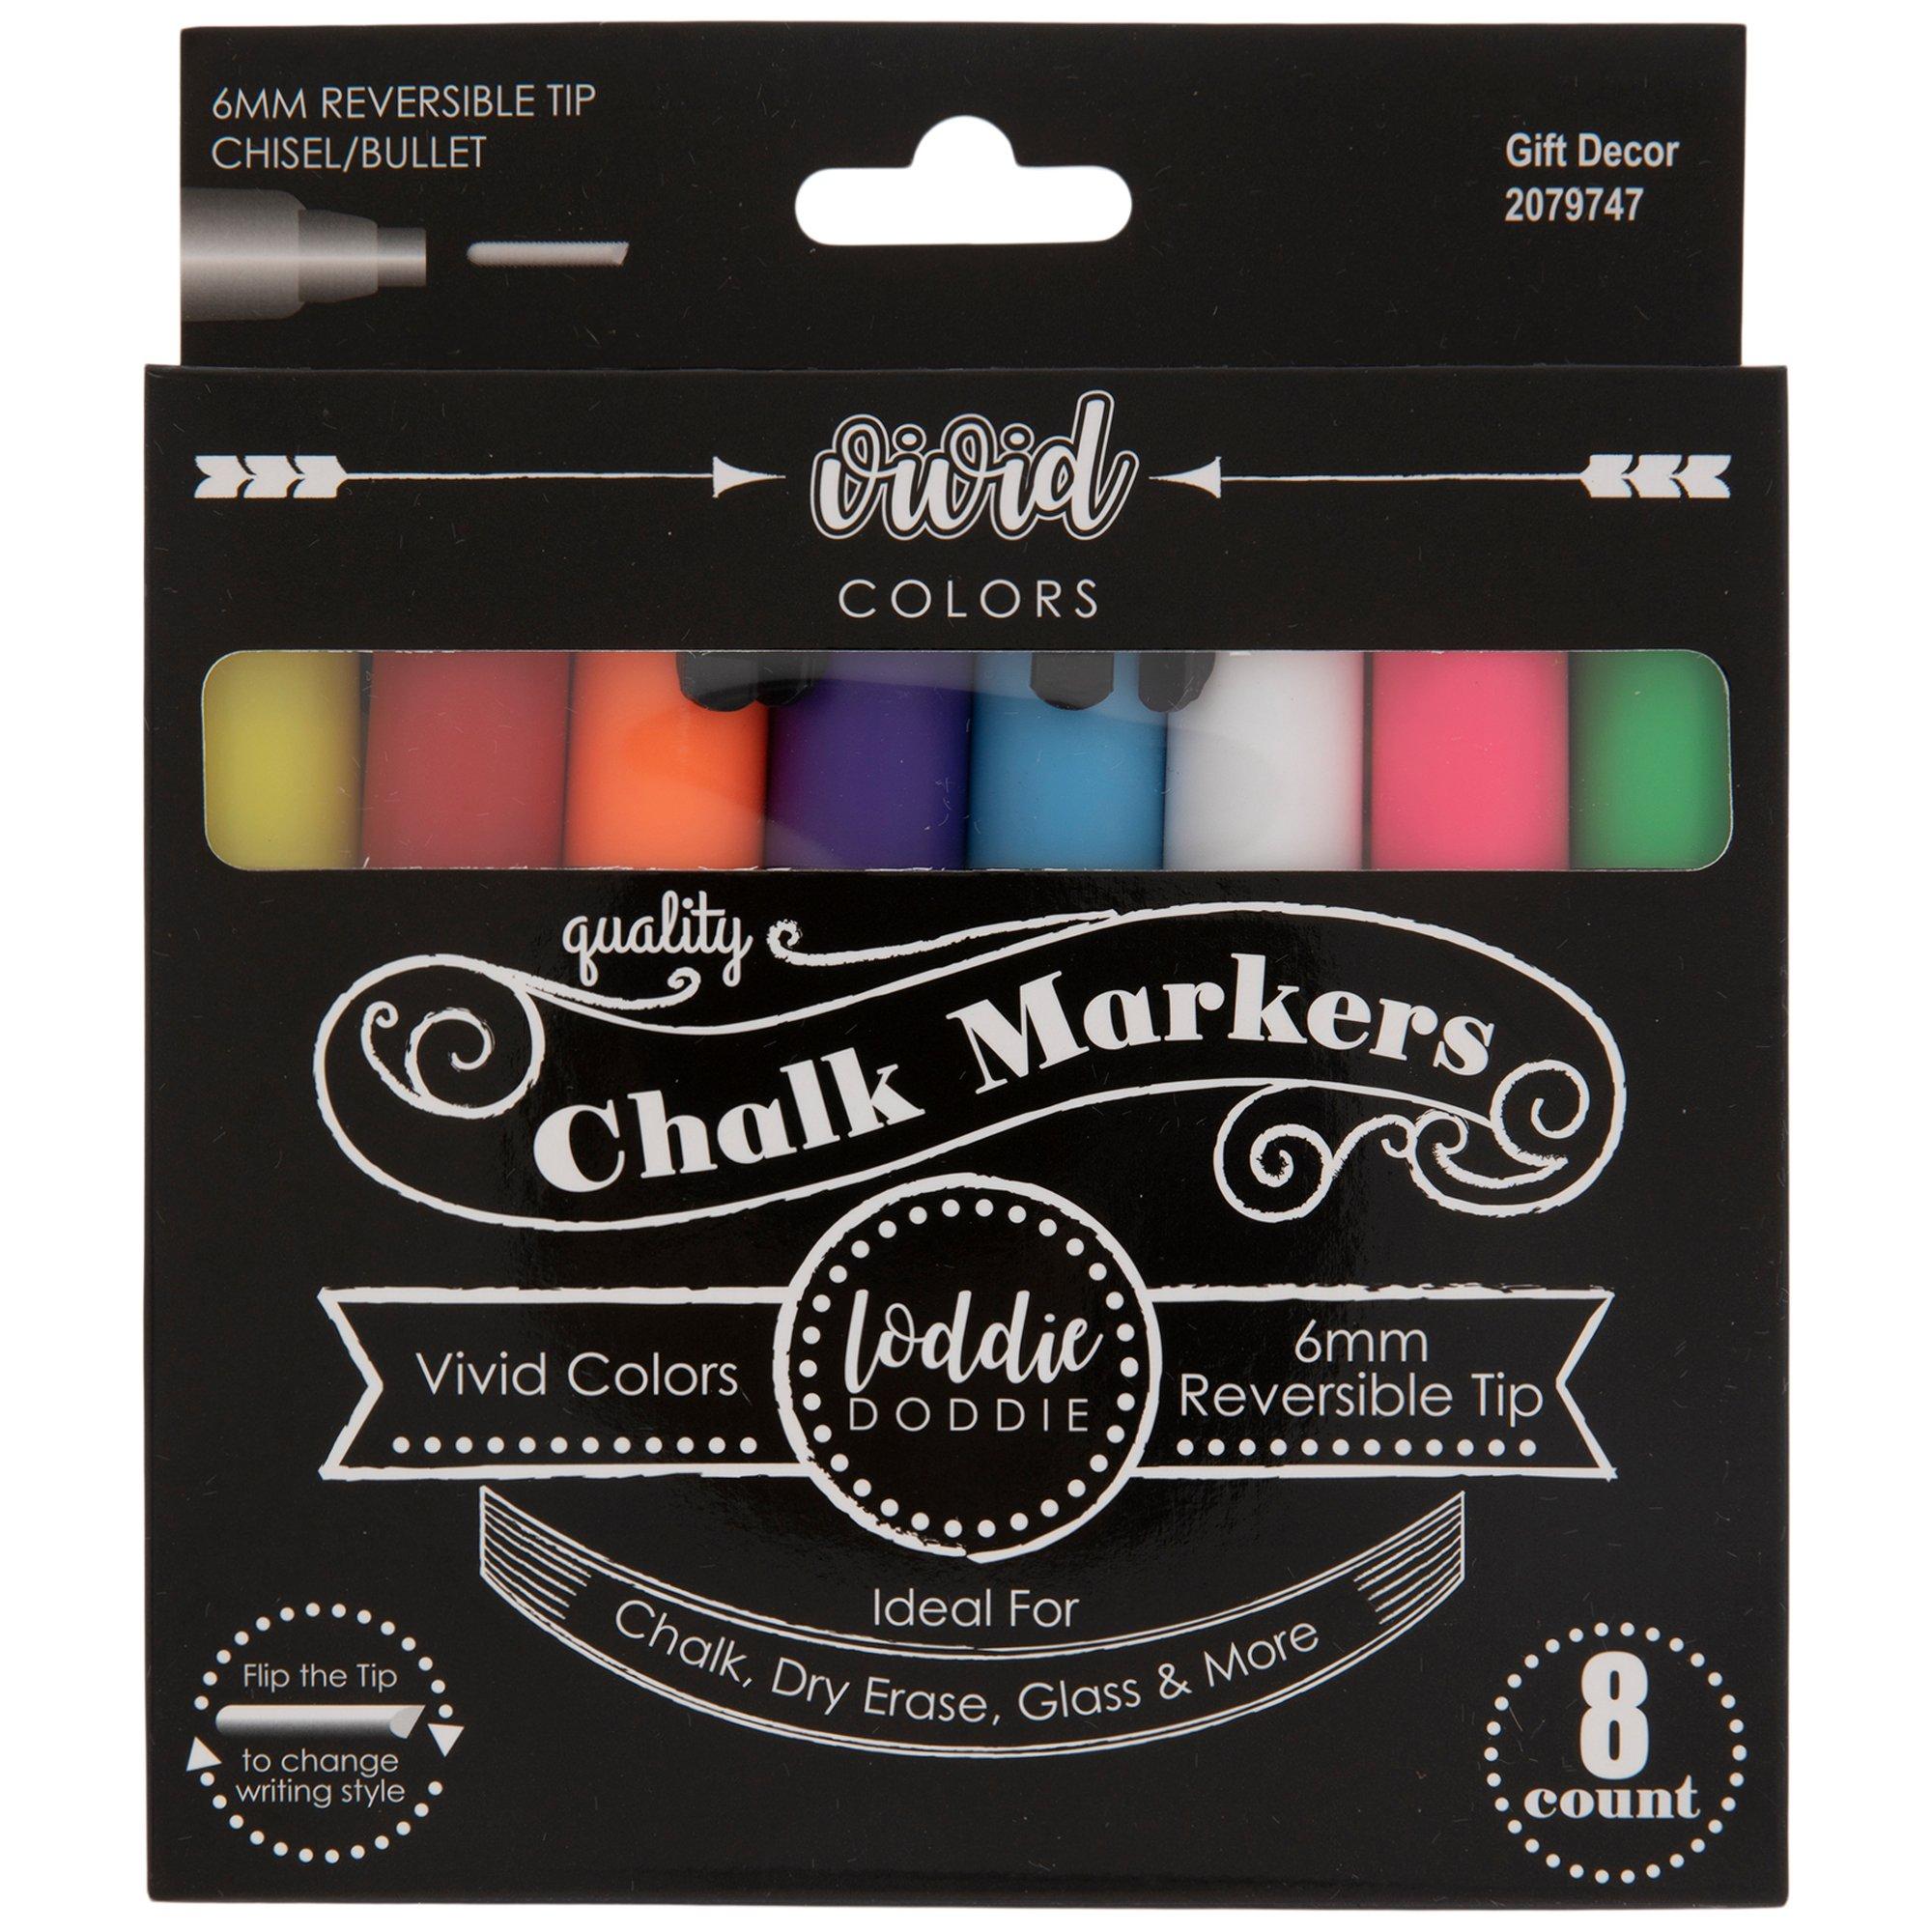 Classic Super Tip Washable Markers, Hobby Lobby